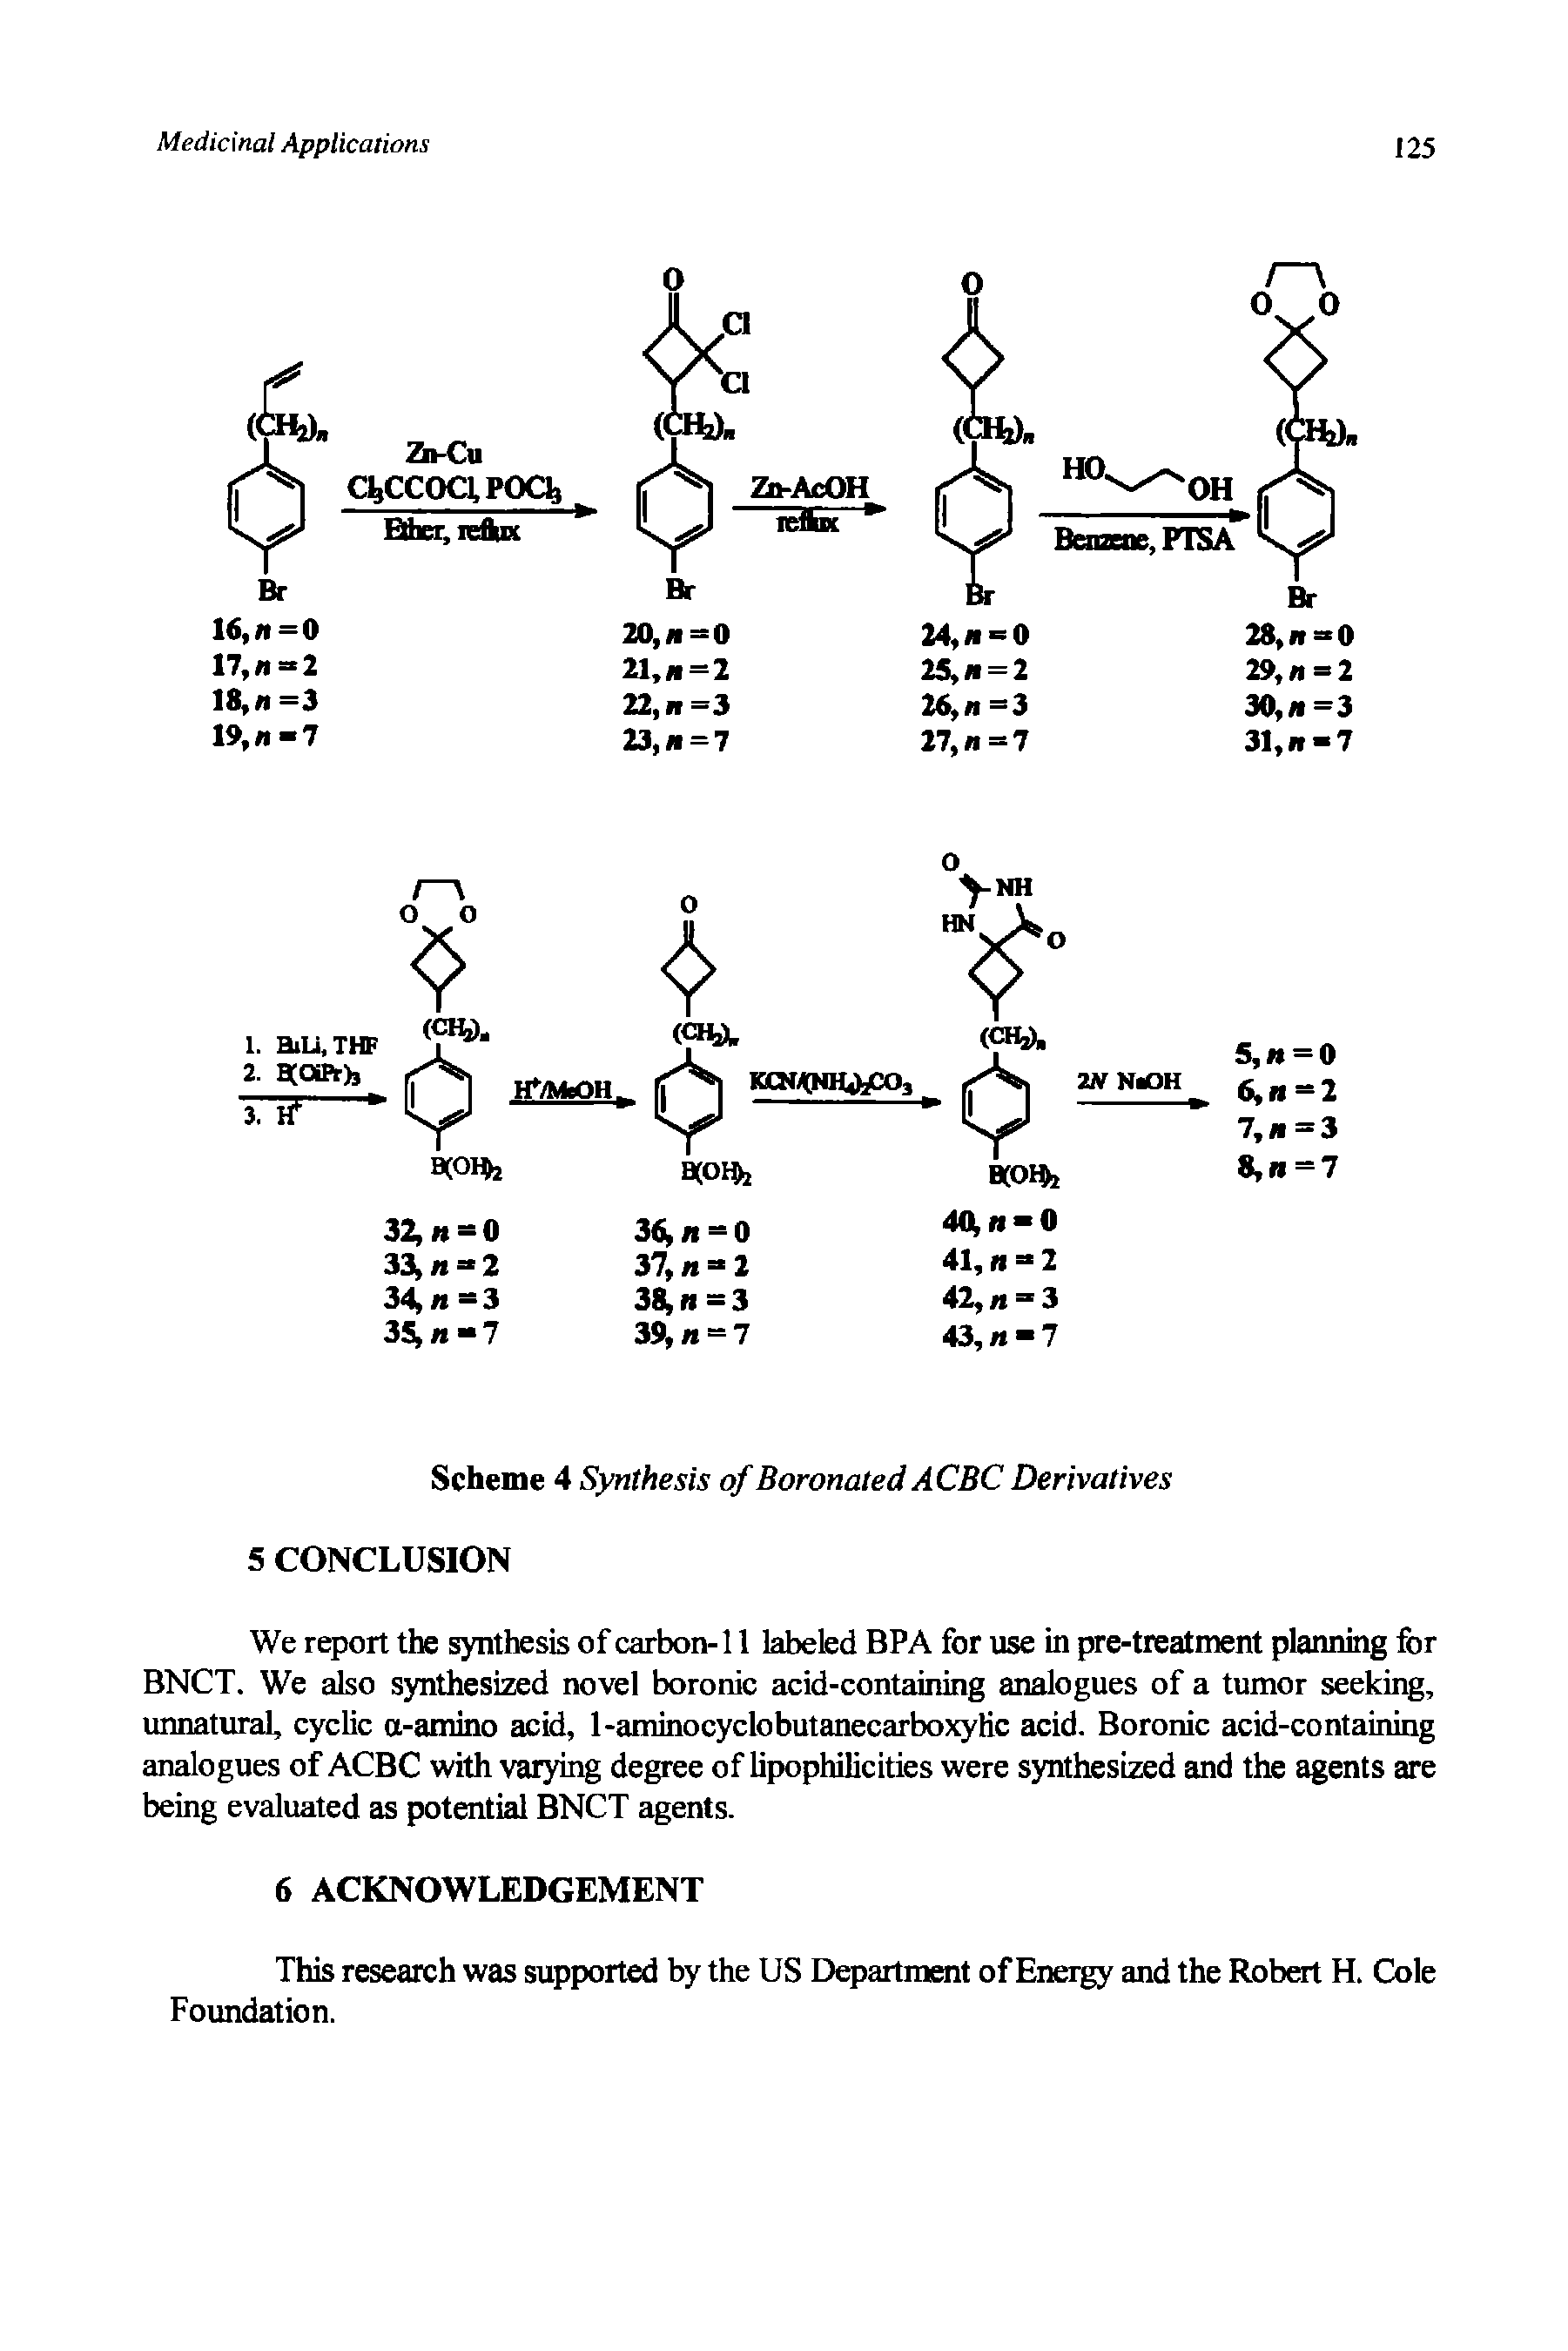 Scheme 4 Synthesis of Boronated ACBC Derivatives 5 CONCLUSION...